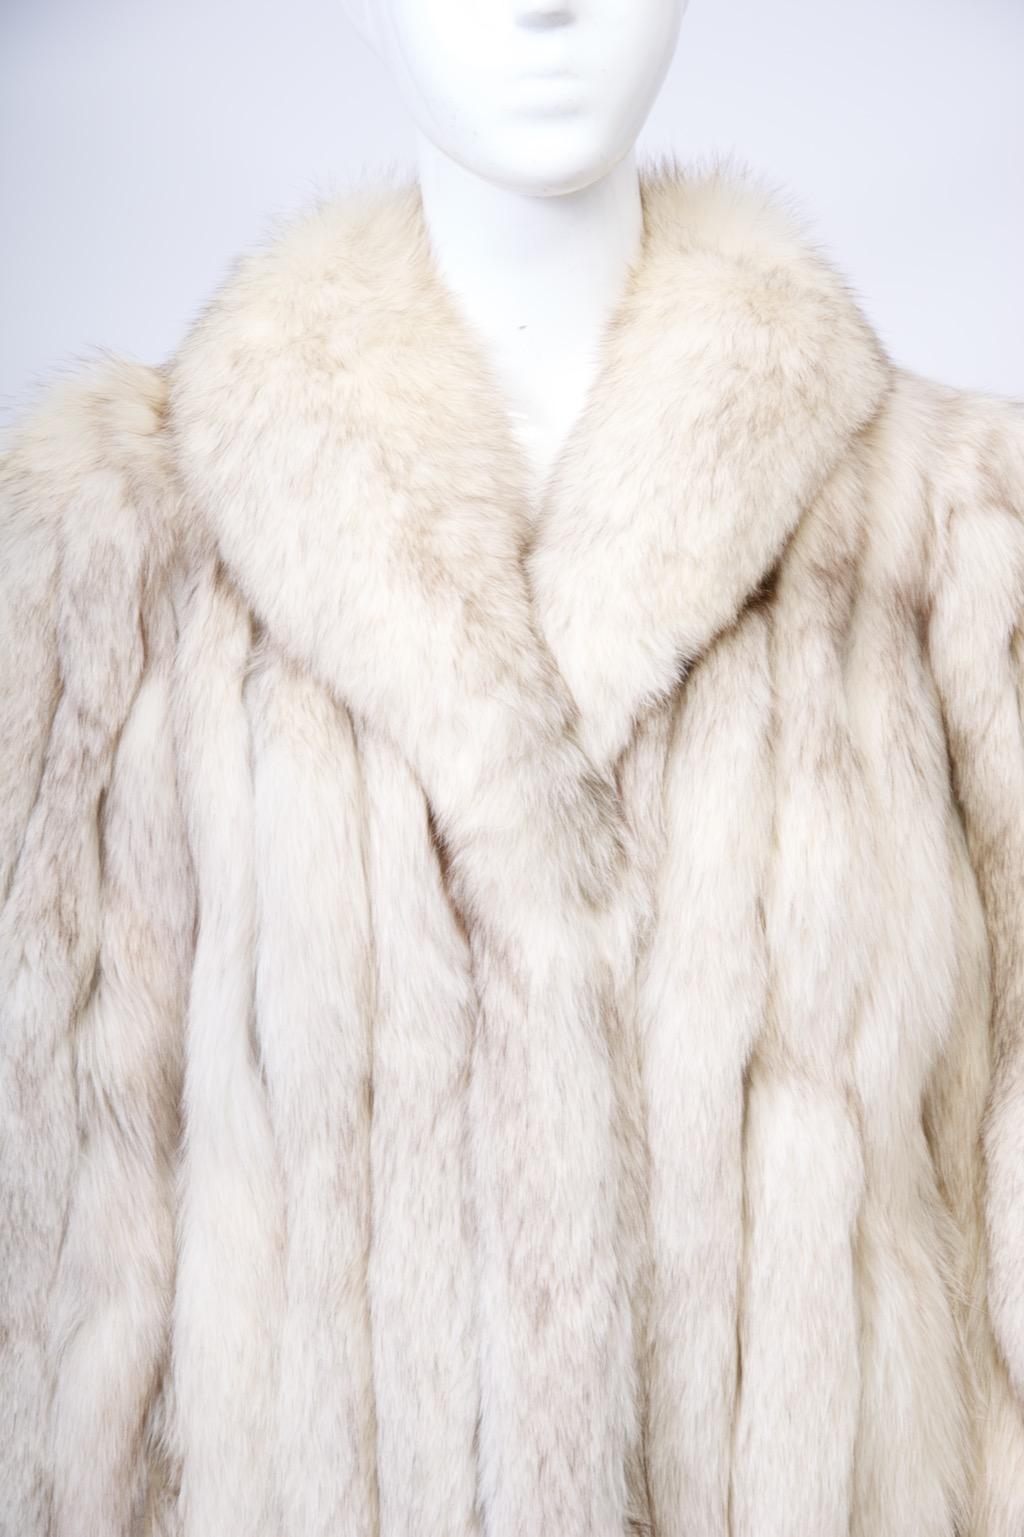 Vintage fox jacket featuring vertical skins joined by leather strips by renowned Saga company. The straight cut jacket boasts a shawl collar and hidden slash pockets, as well as fur hook closures. Hip length. On the interior, find a clean ivory